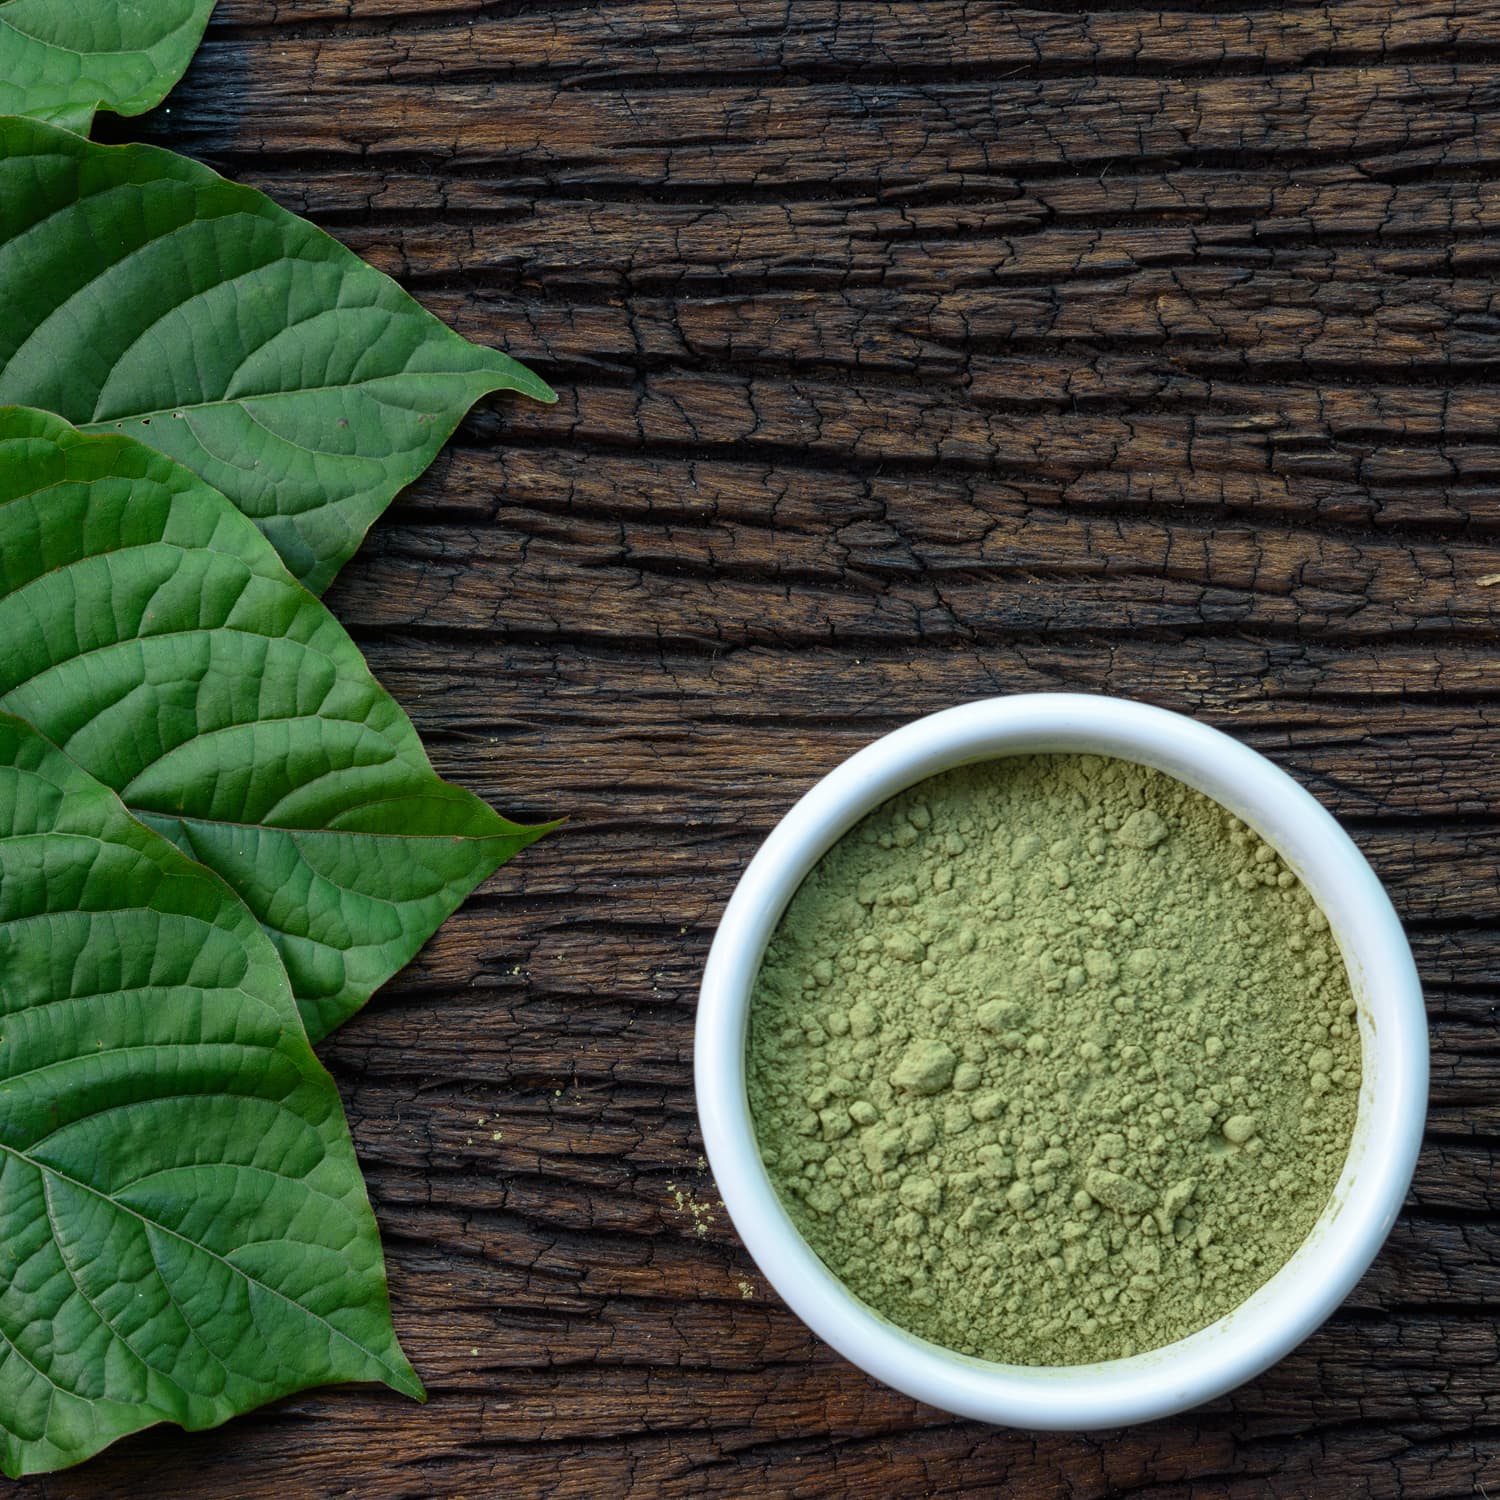 Green vein kratom powder in a bowl on a wooden table